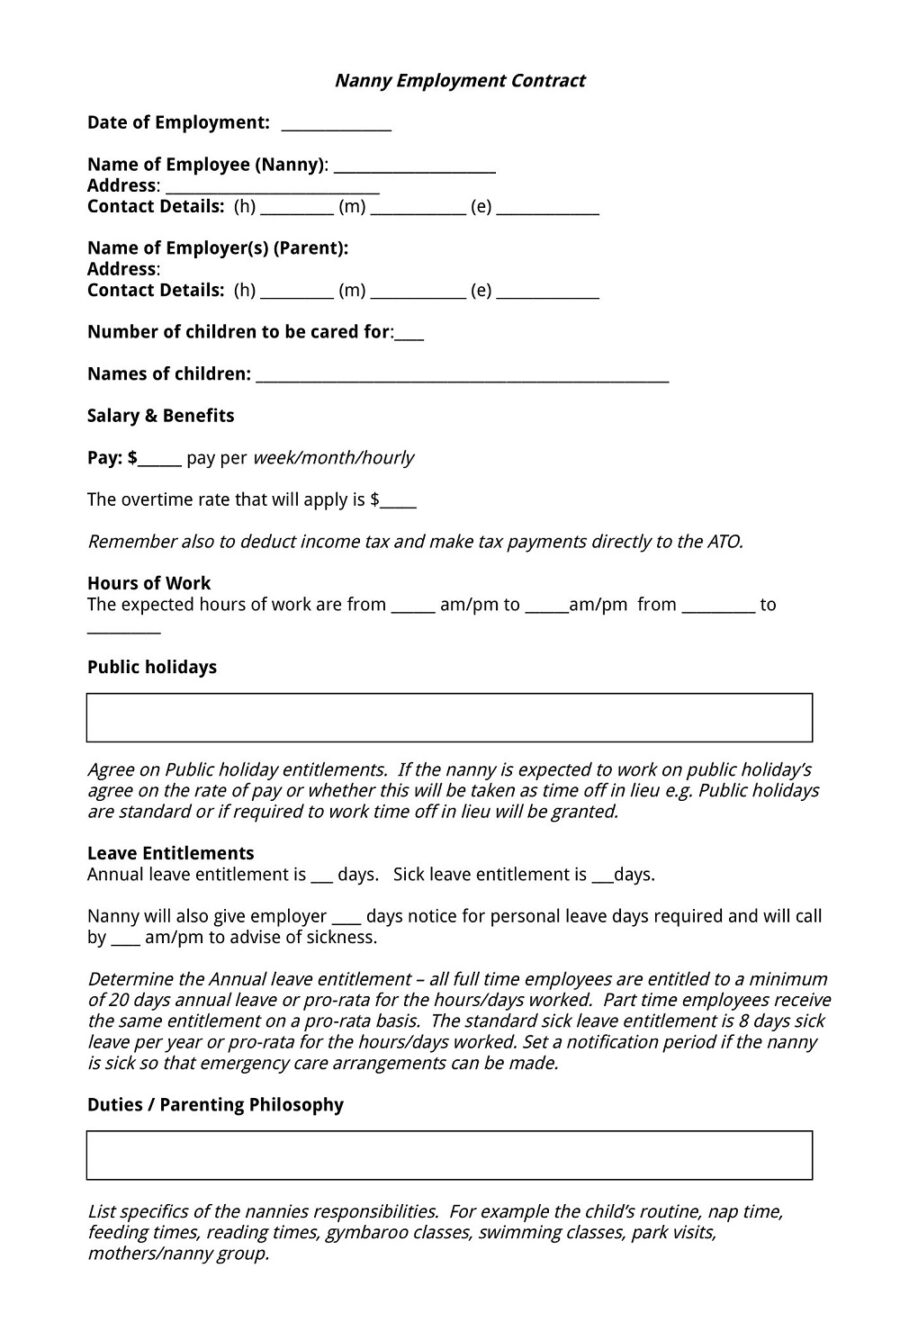 Basic Nanny Employment Contract